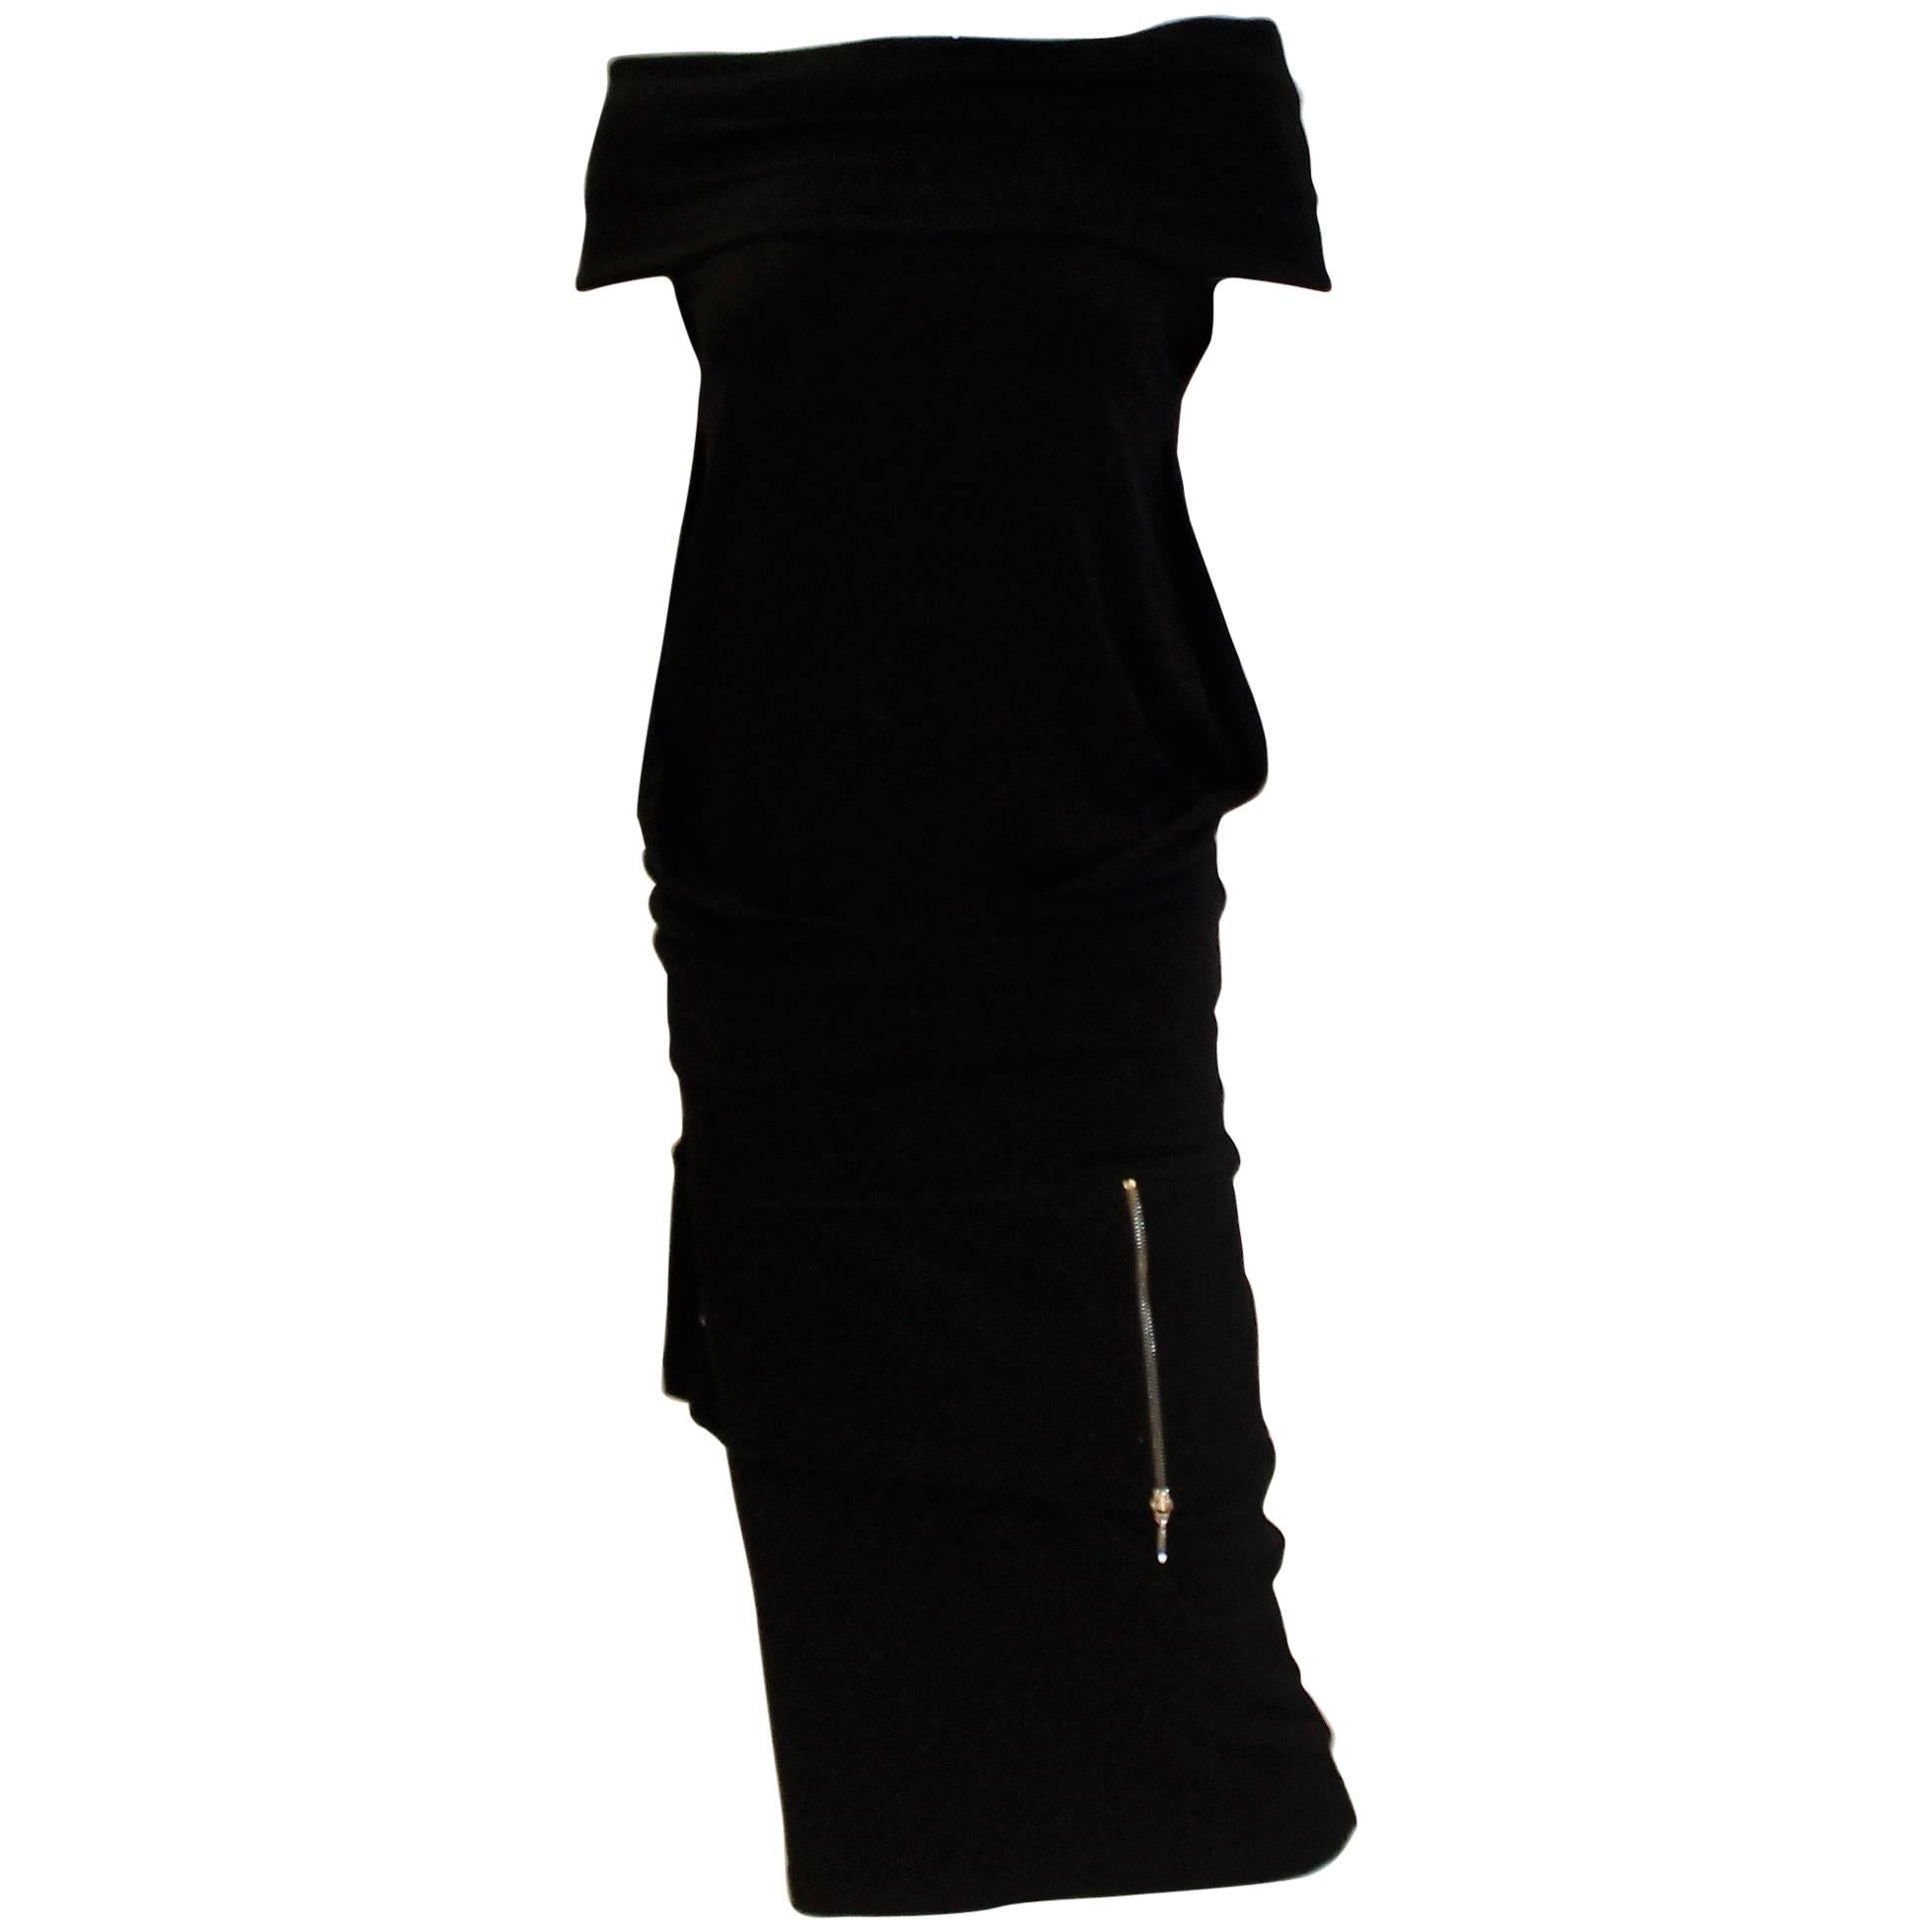 Plein Sud Black Off the Shoulder Top and Skirt